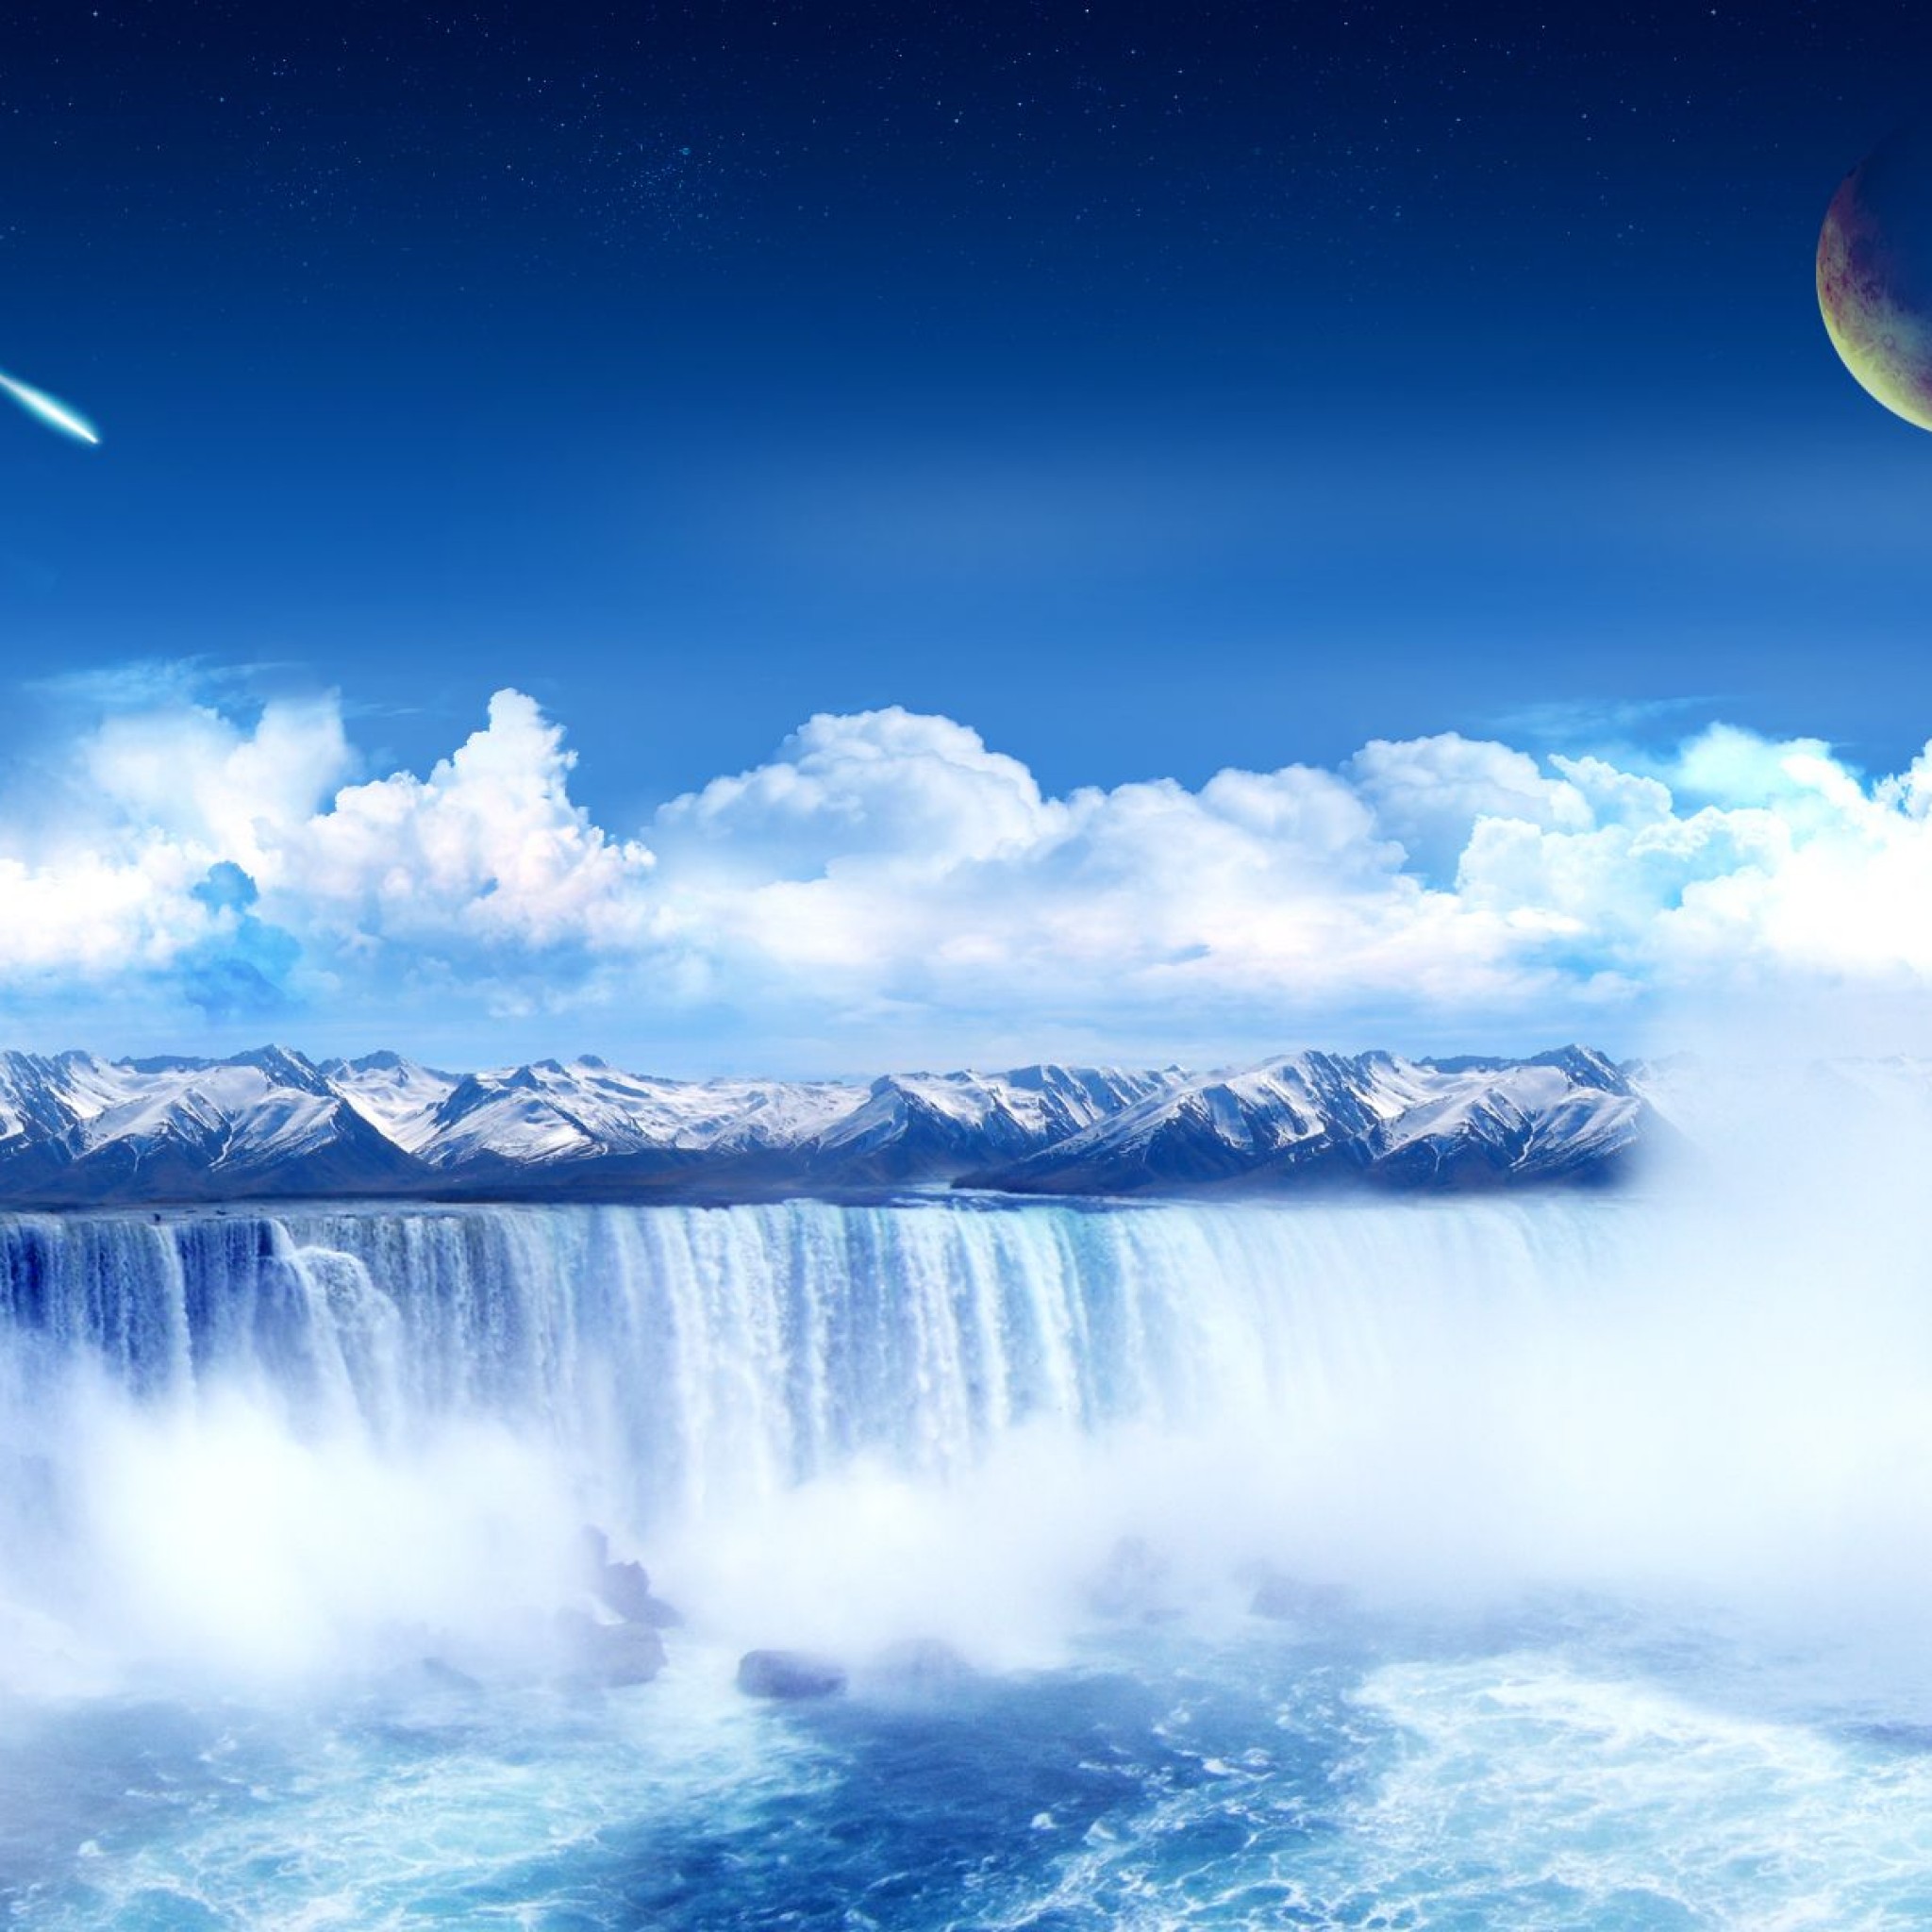 the best niagara falls bluechamelon pictures image free